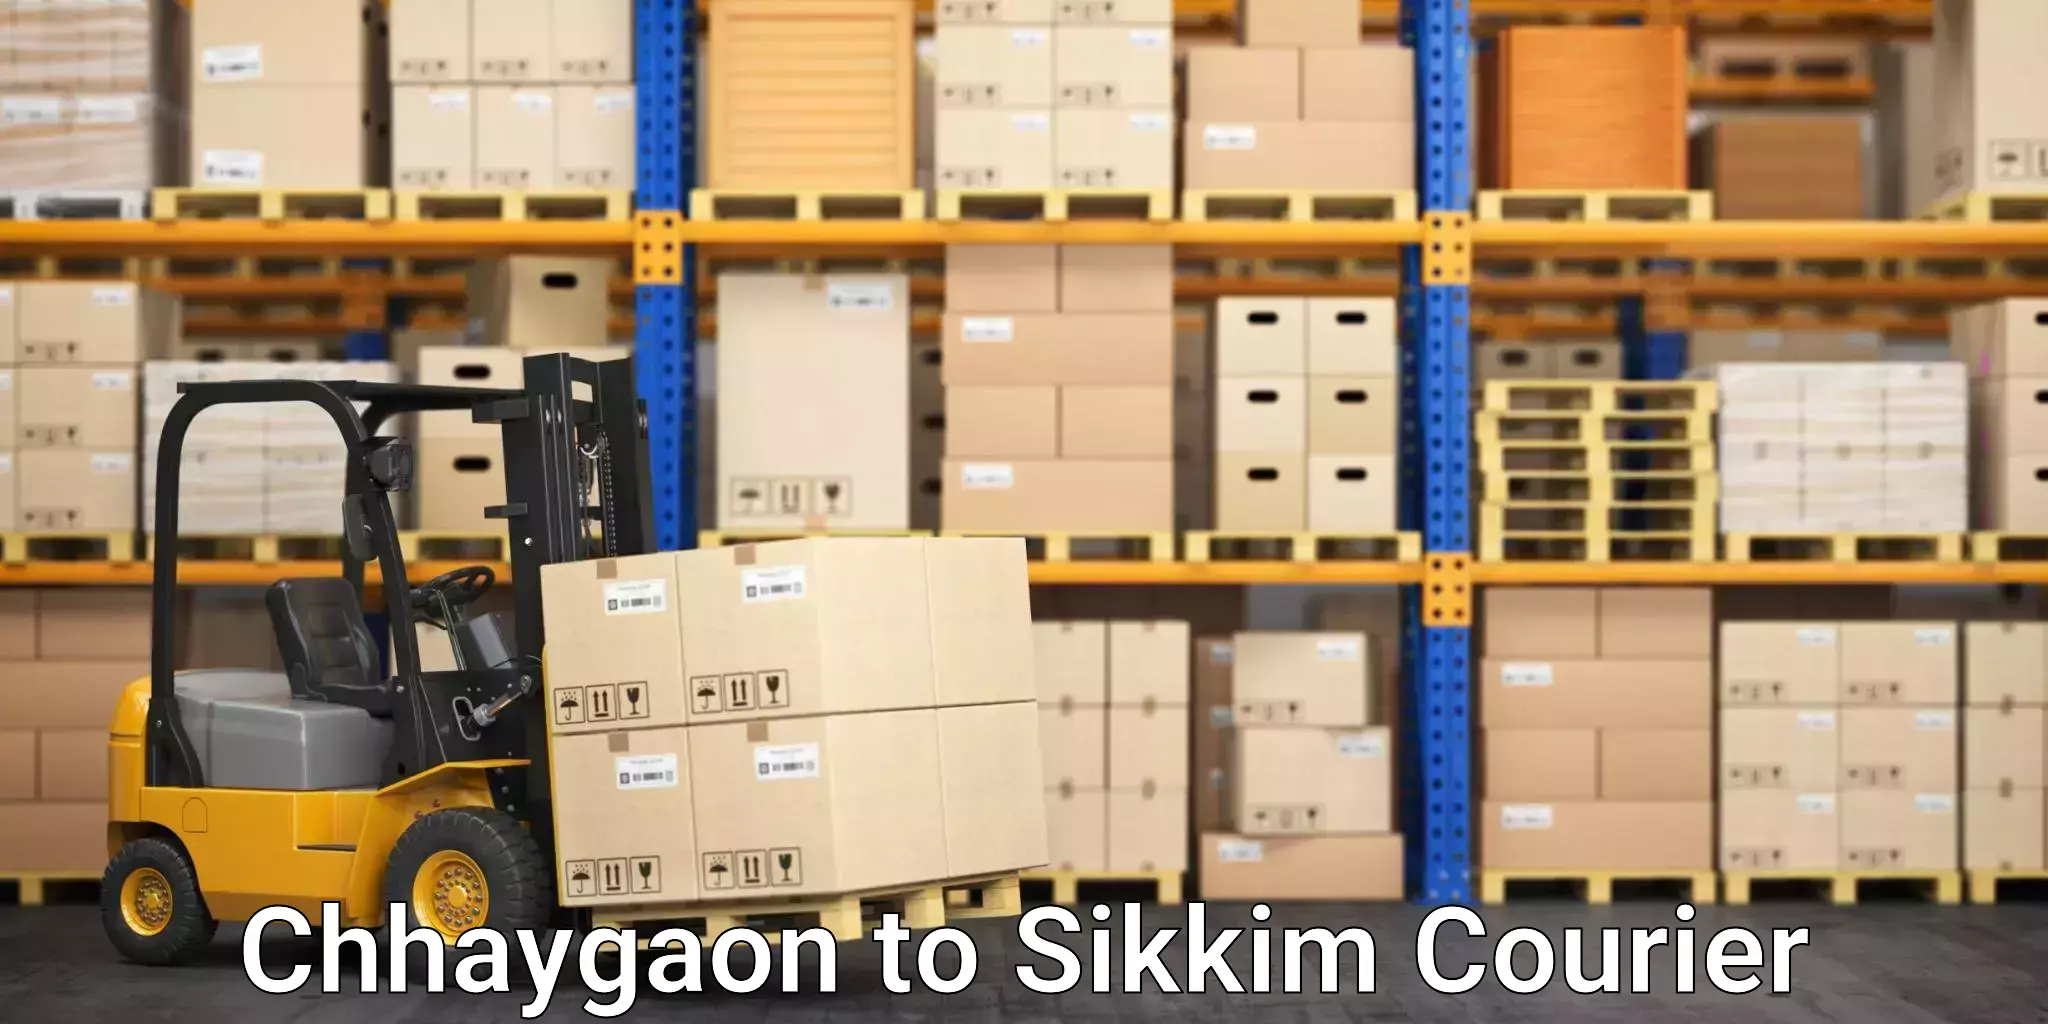 Courier service booking Chhaygaon to Sikkim